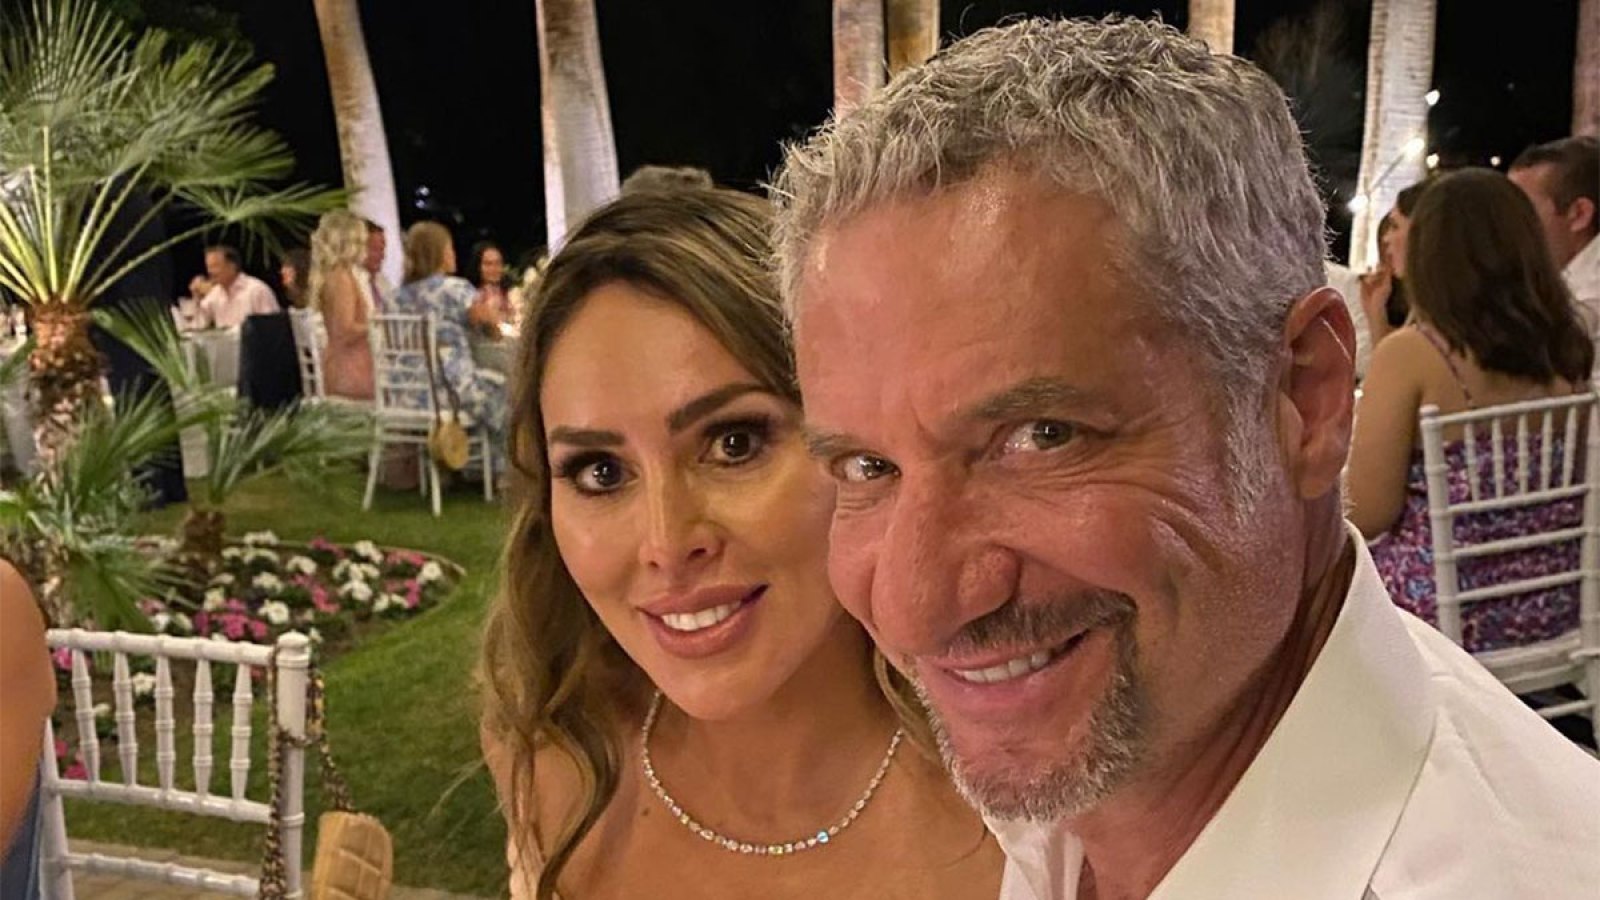 RHOC's Kelly Dodd, Rick Leventhal Face Backlash for Halloween Costumes Inspired by Alec Baldwin's 'Rust' Set Shooting